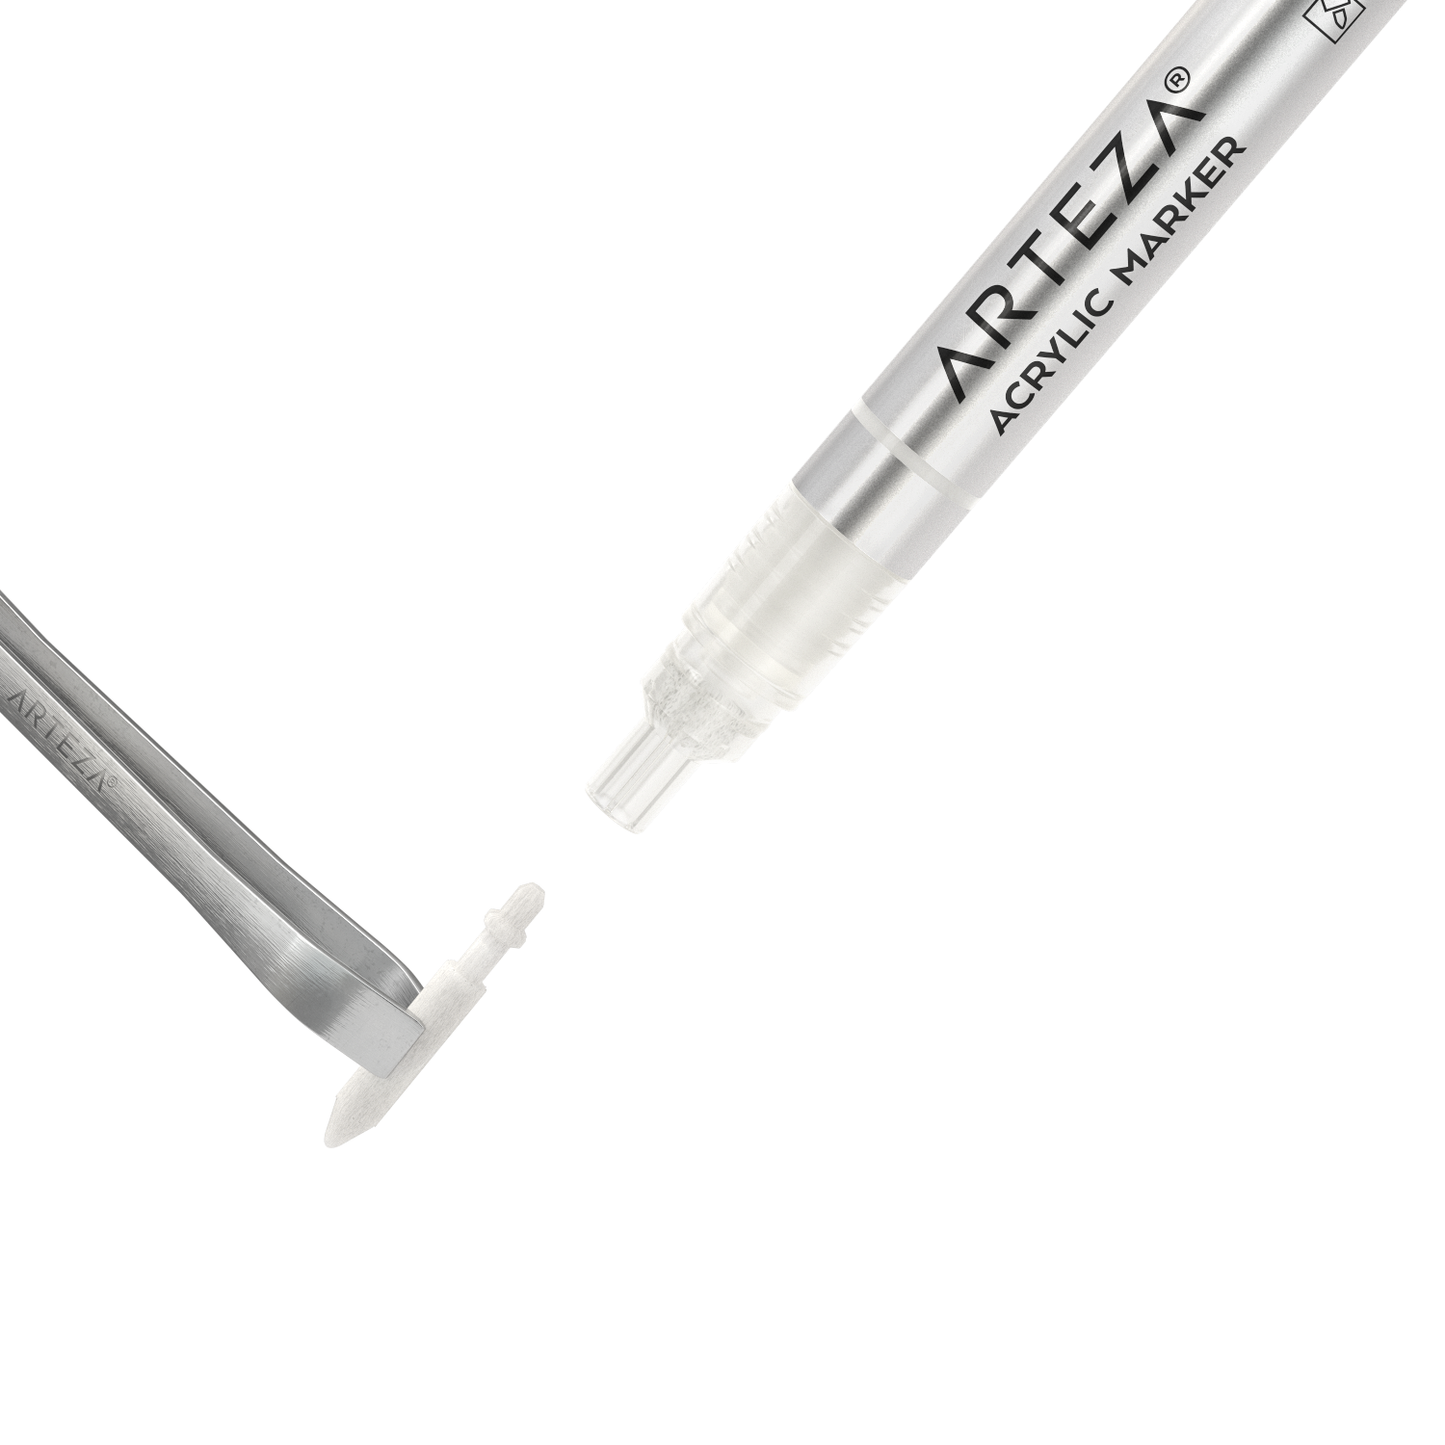 Extra-Fine Marker Nib Replacements for Acrylic Markers, Set of 10